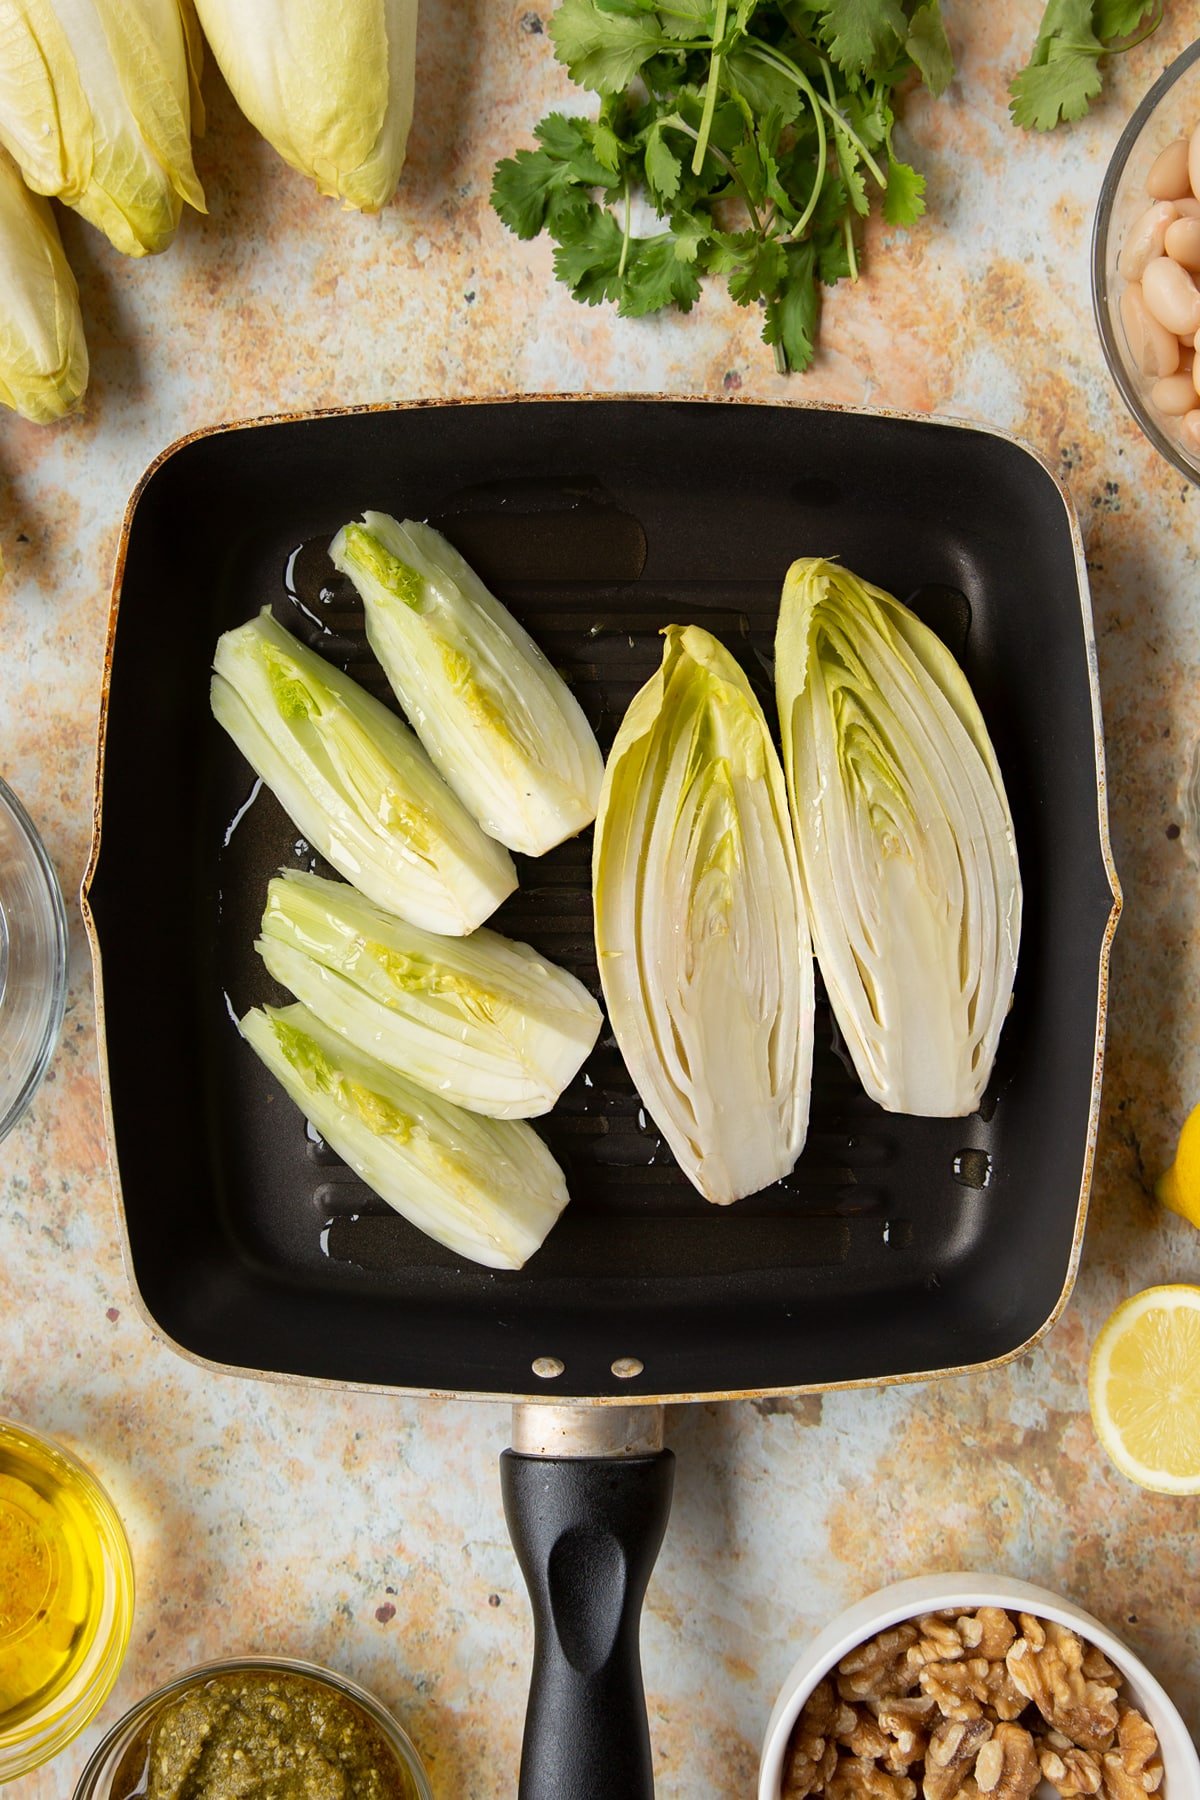 Chicory and fennel pieces in a griddle pan with oil.